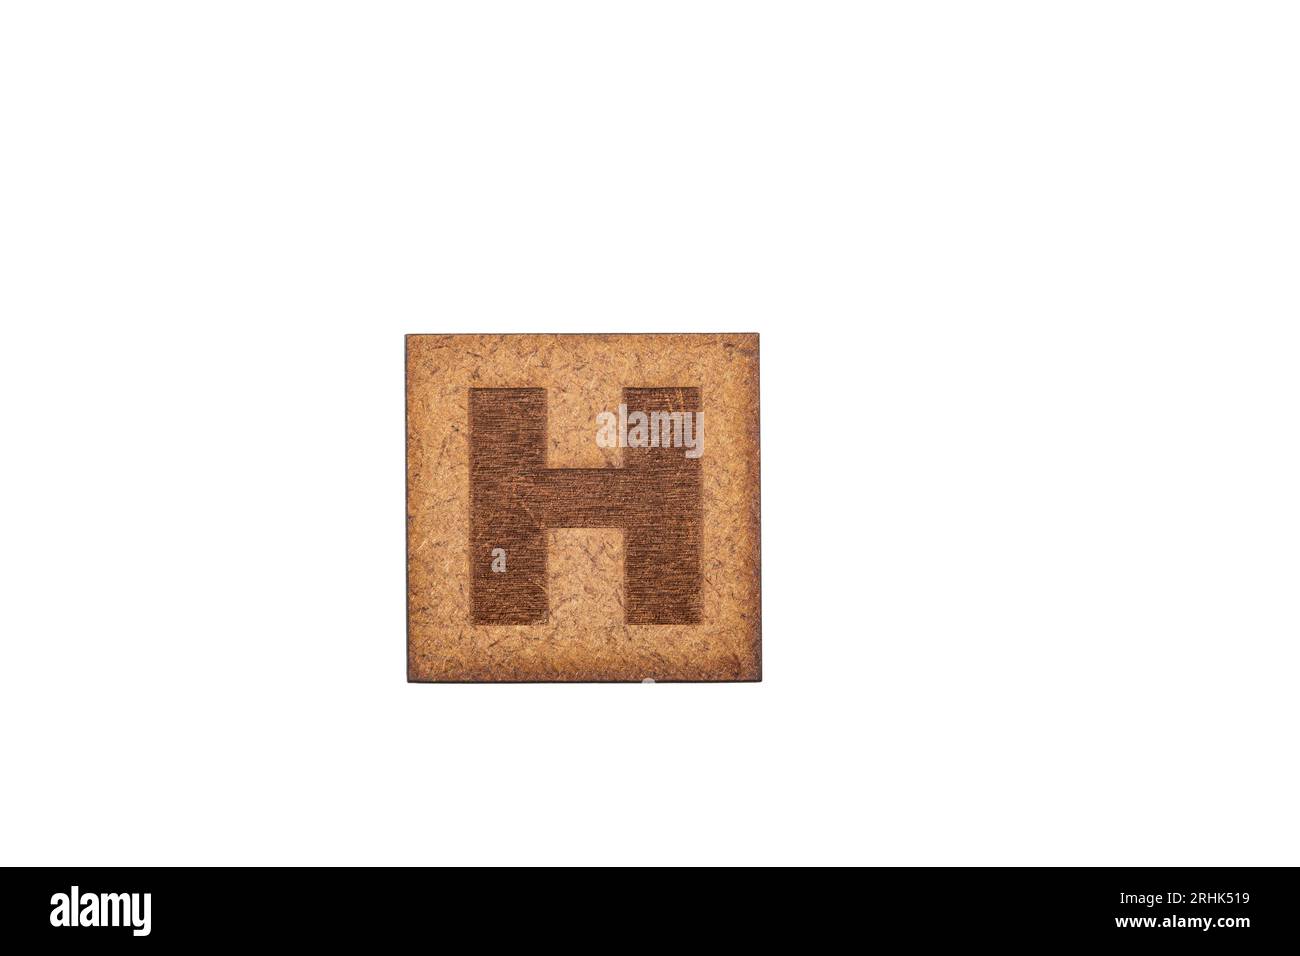 Capital Letter In Square Wooden Tiles - Letter H, On White Background. Stock Photo